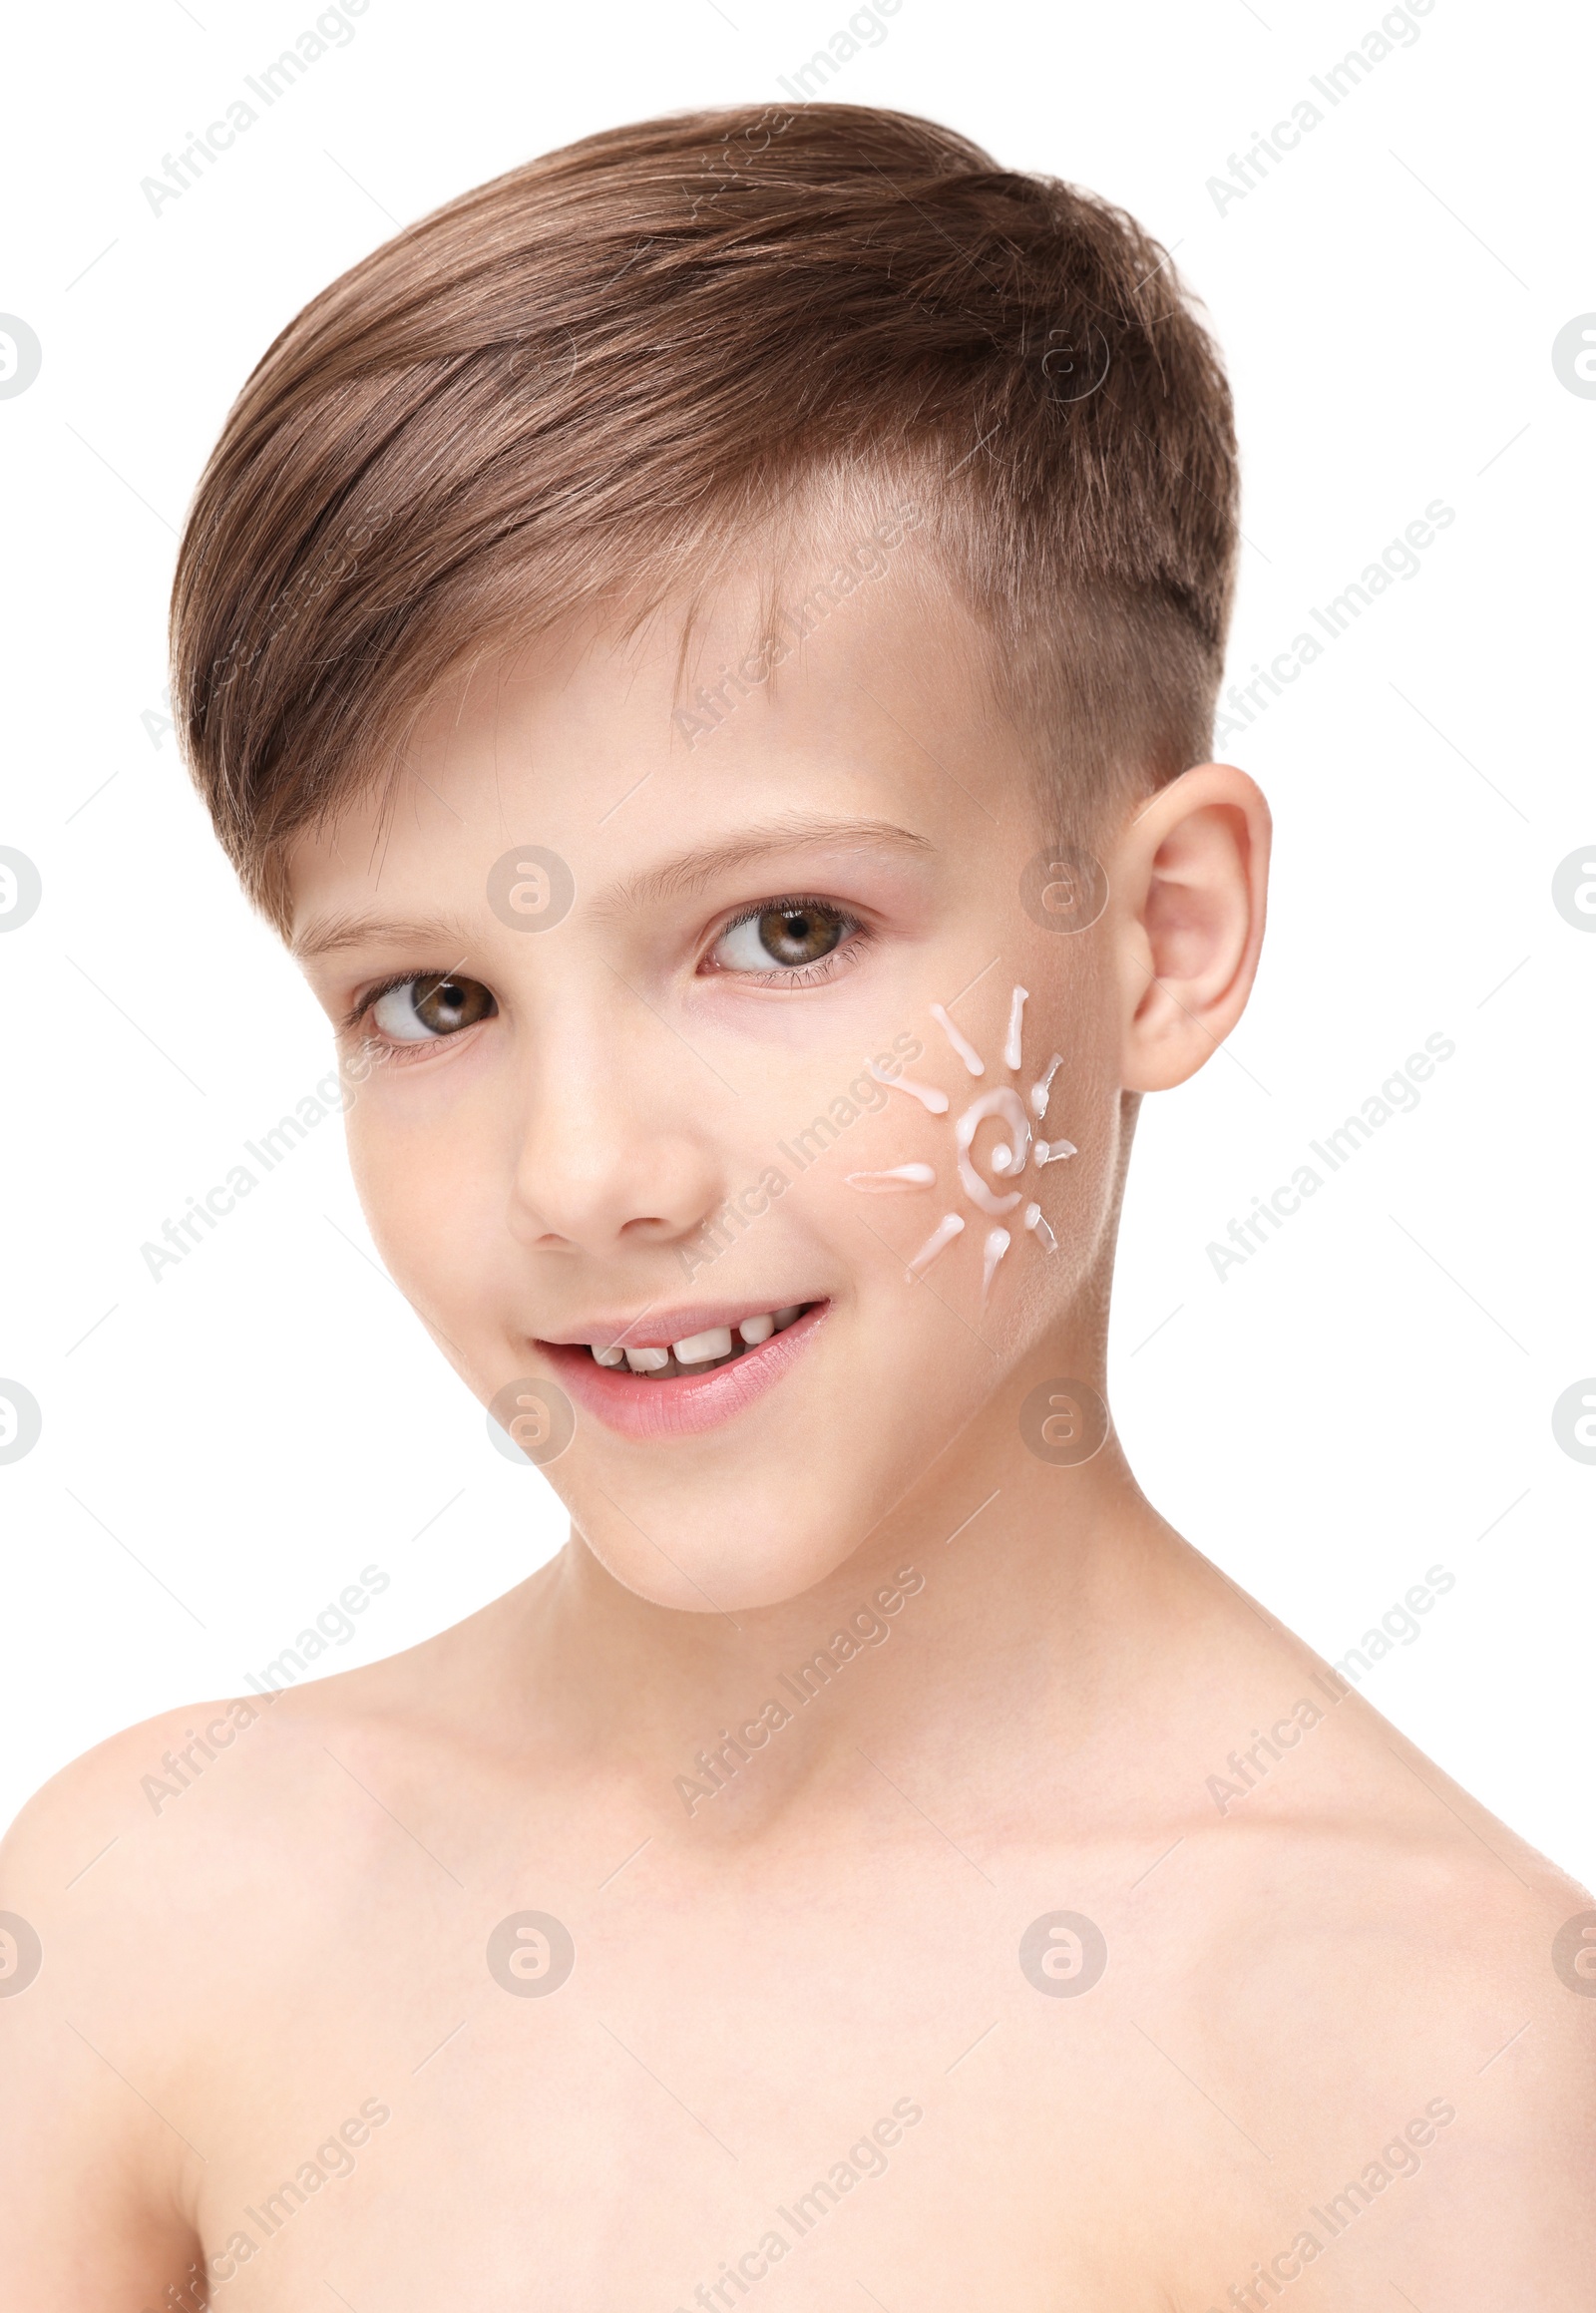 Photo of Happy boy with sun protection cream on his face against white background